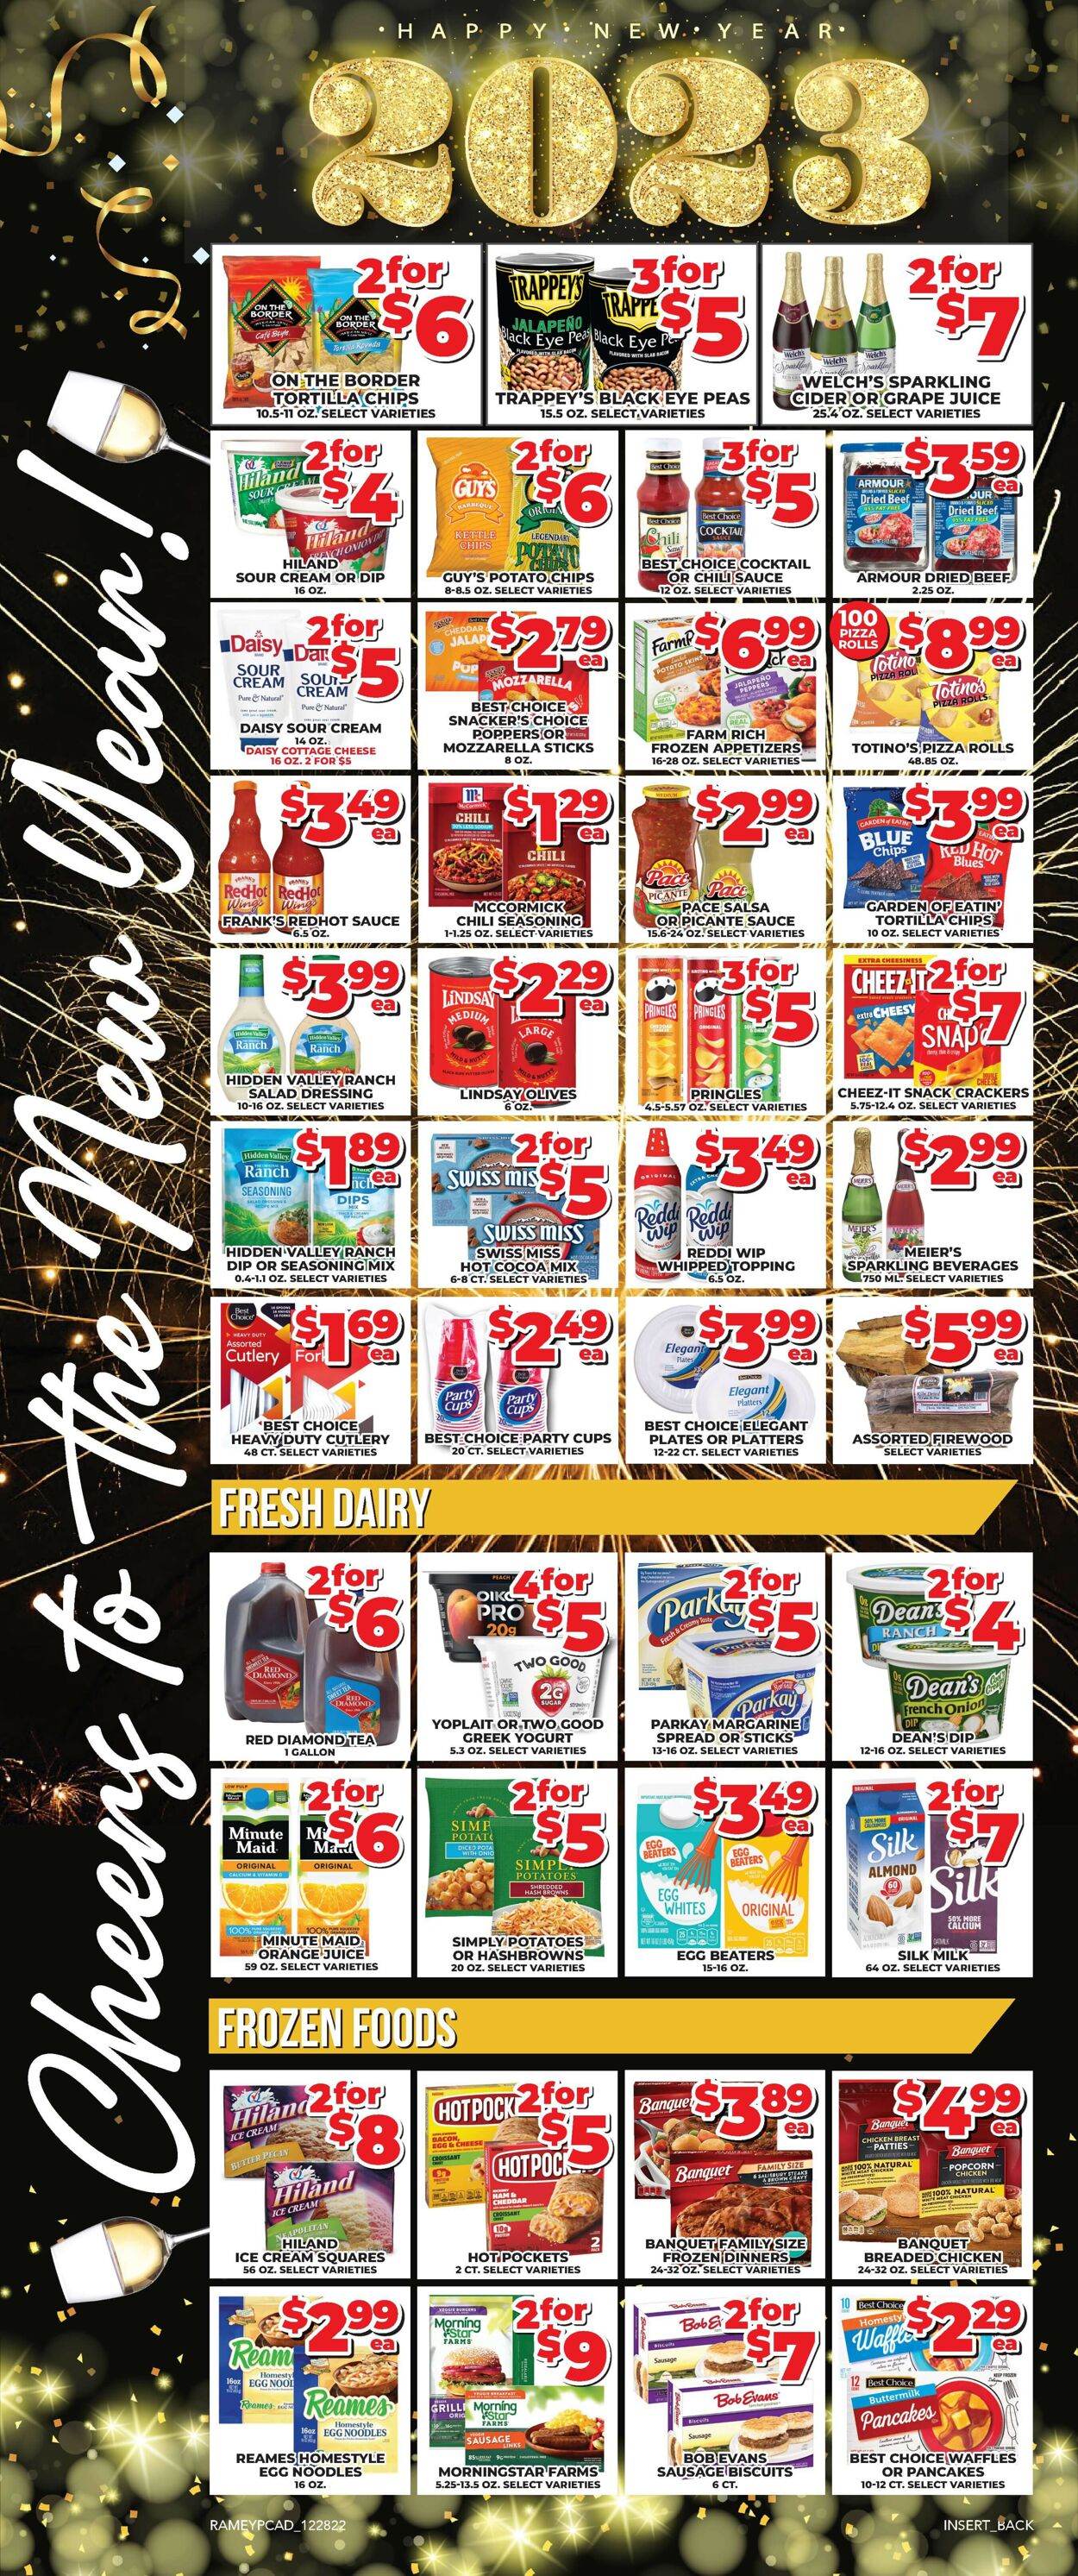 Price Cutter Weekly Ad Circular - valid 12/28-01/03/2023 (Page 4)